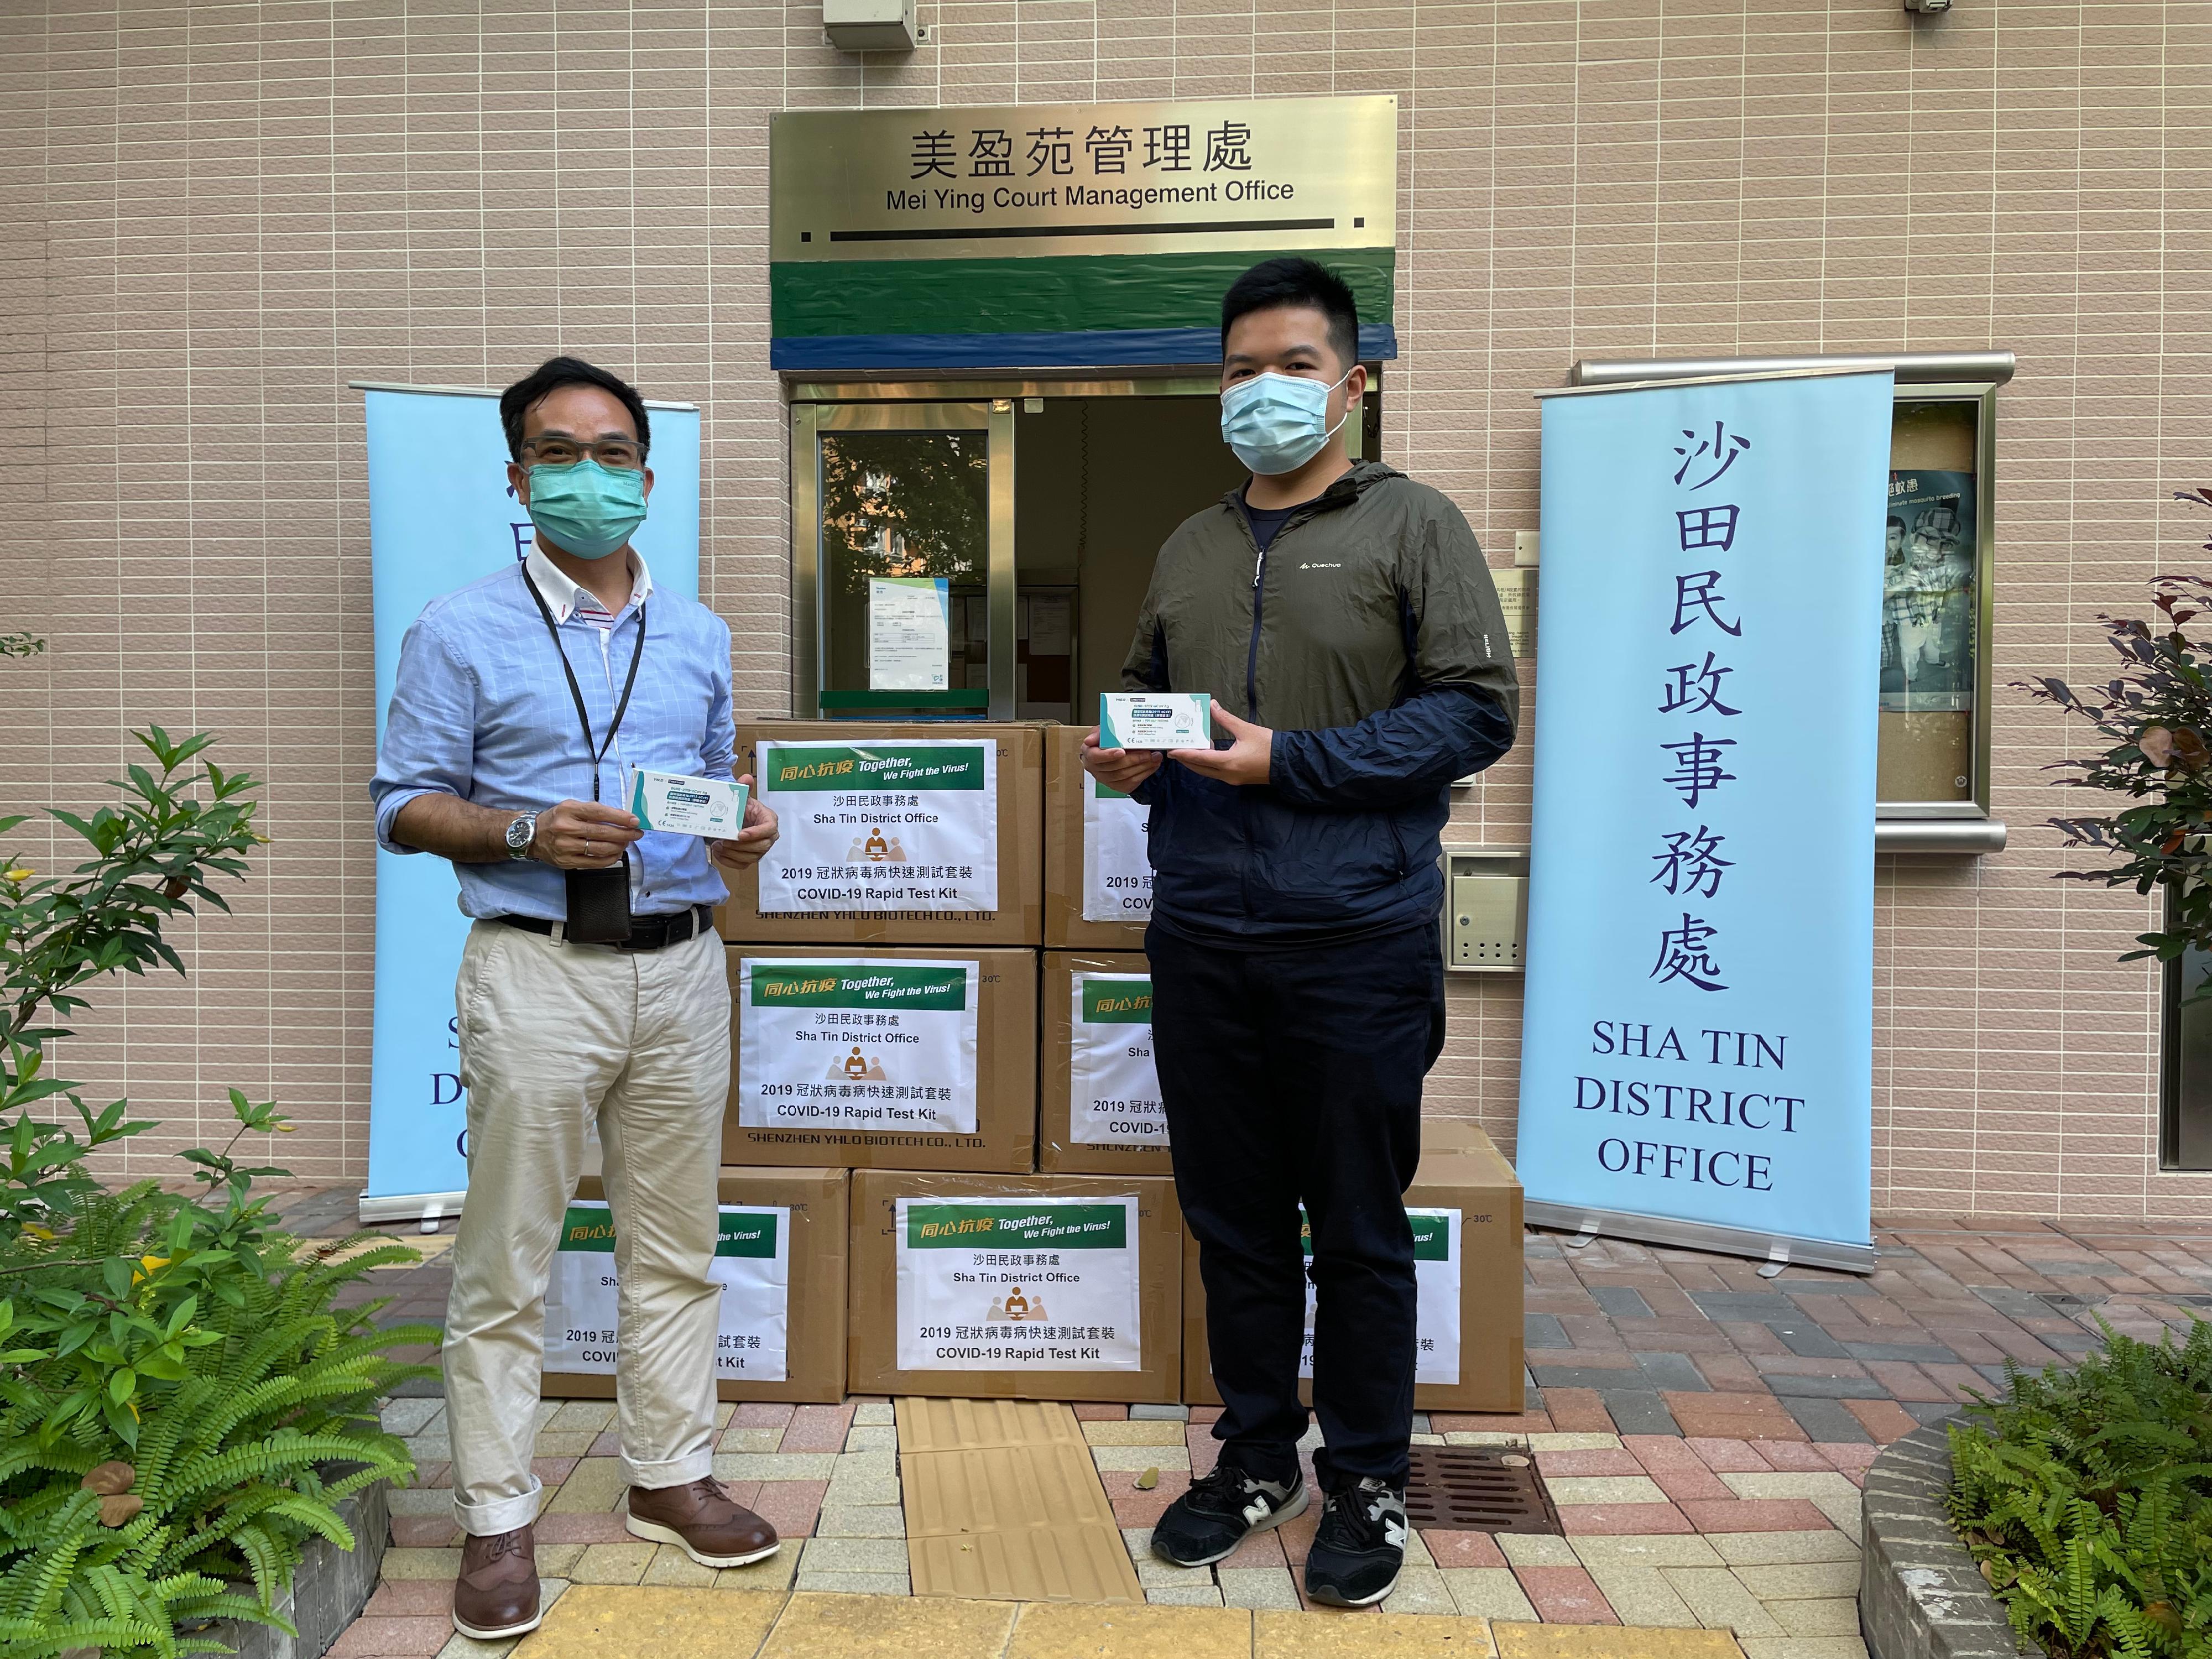 The Sha Tin District Office today (June 28) distributed COVID-19 rapid test kits to households, cleansing workers and property management staff living and working in Mei Ying Court for voluntary testing through the property management company and the owners' corporation.